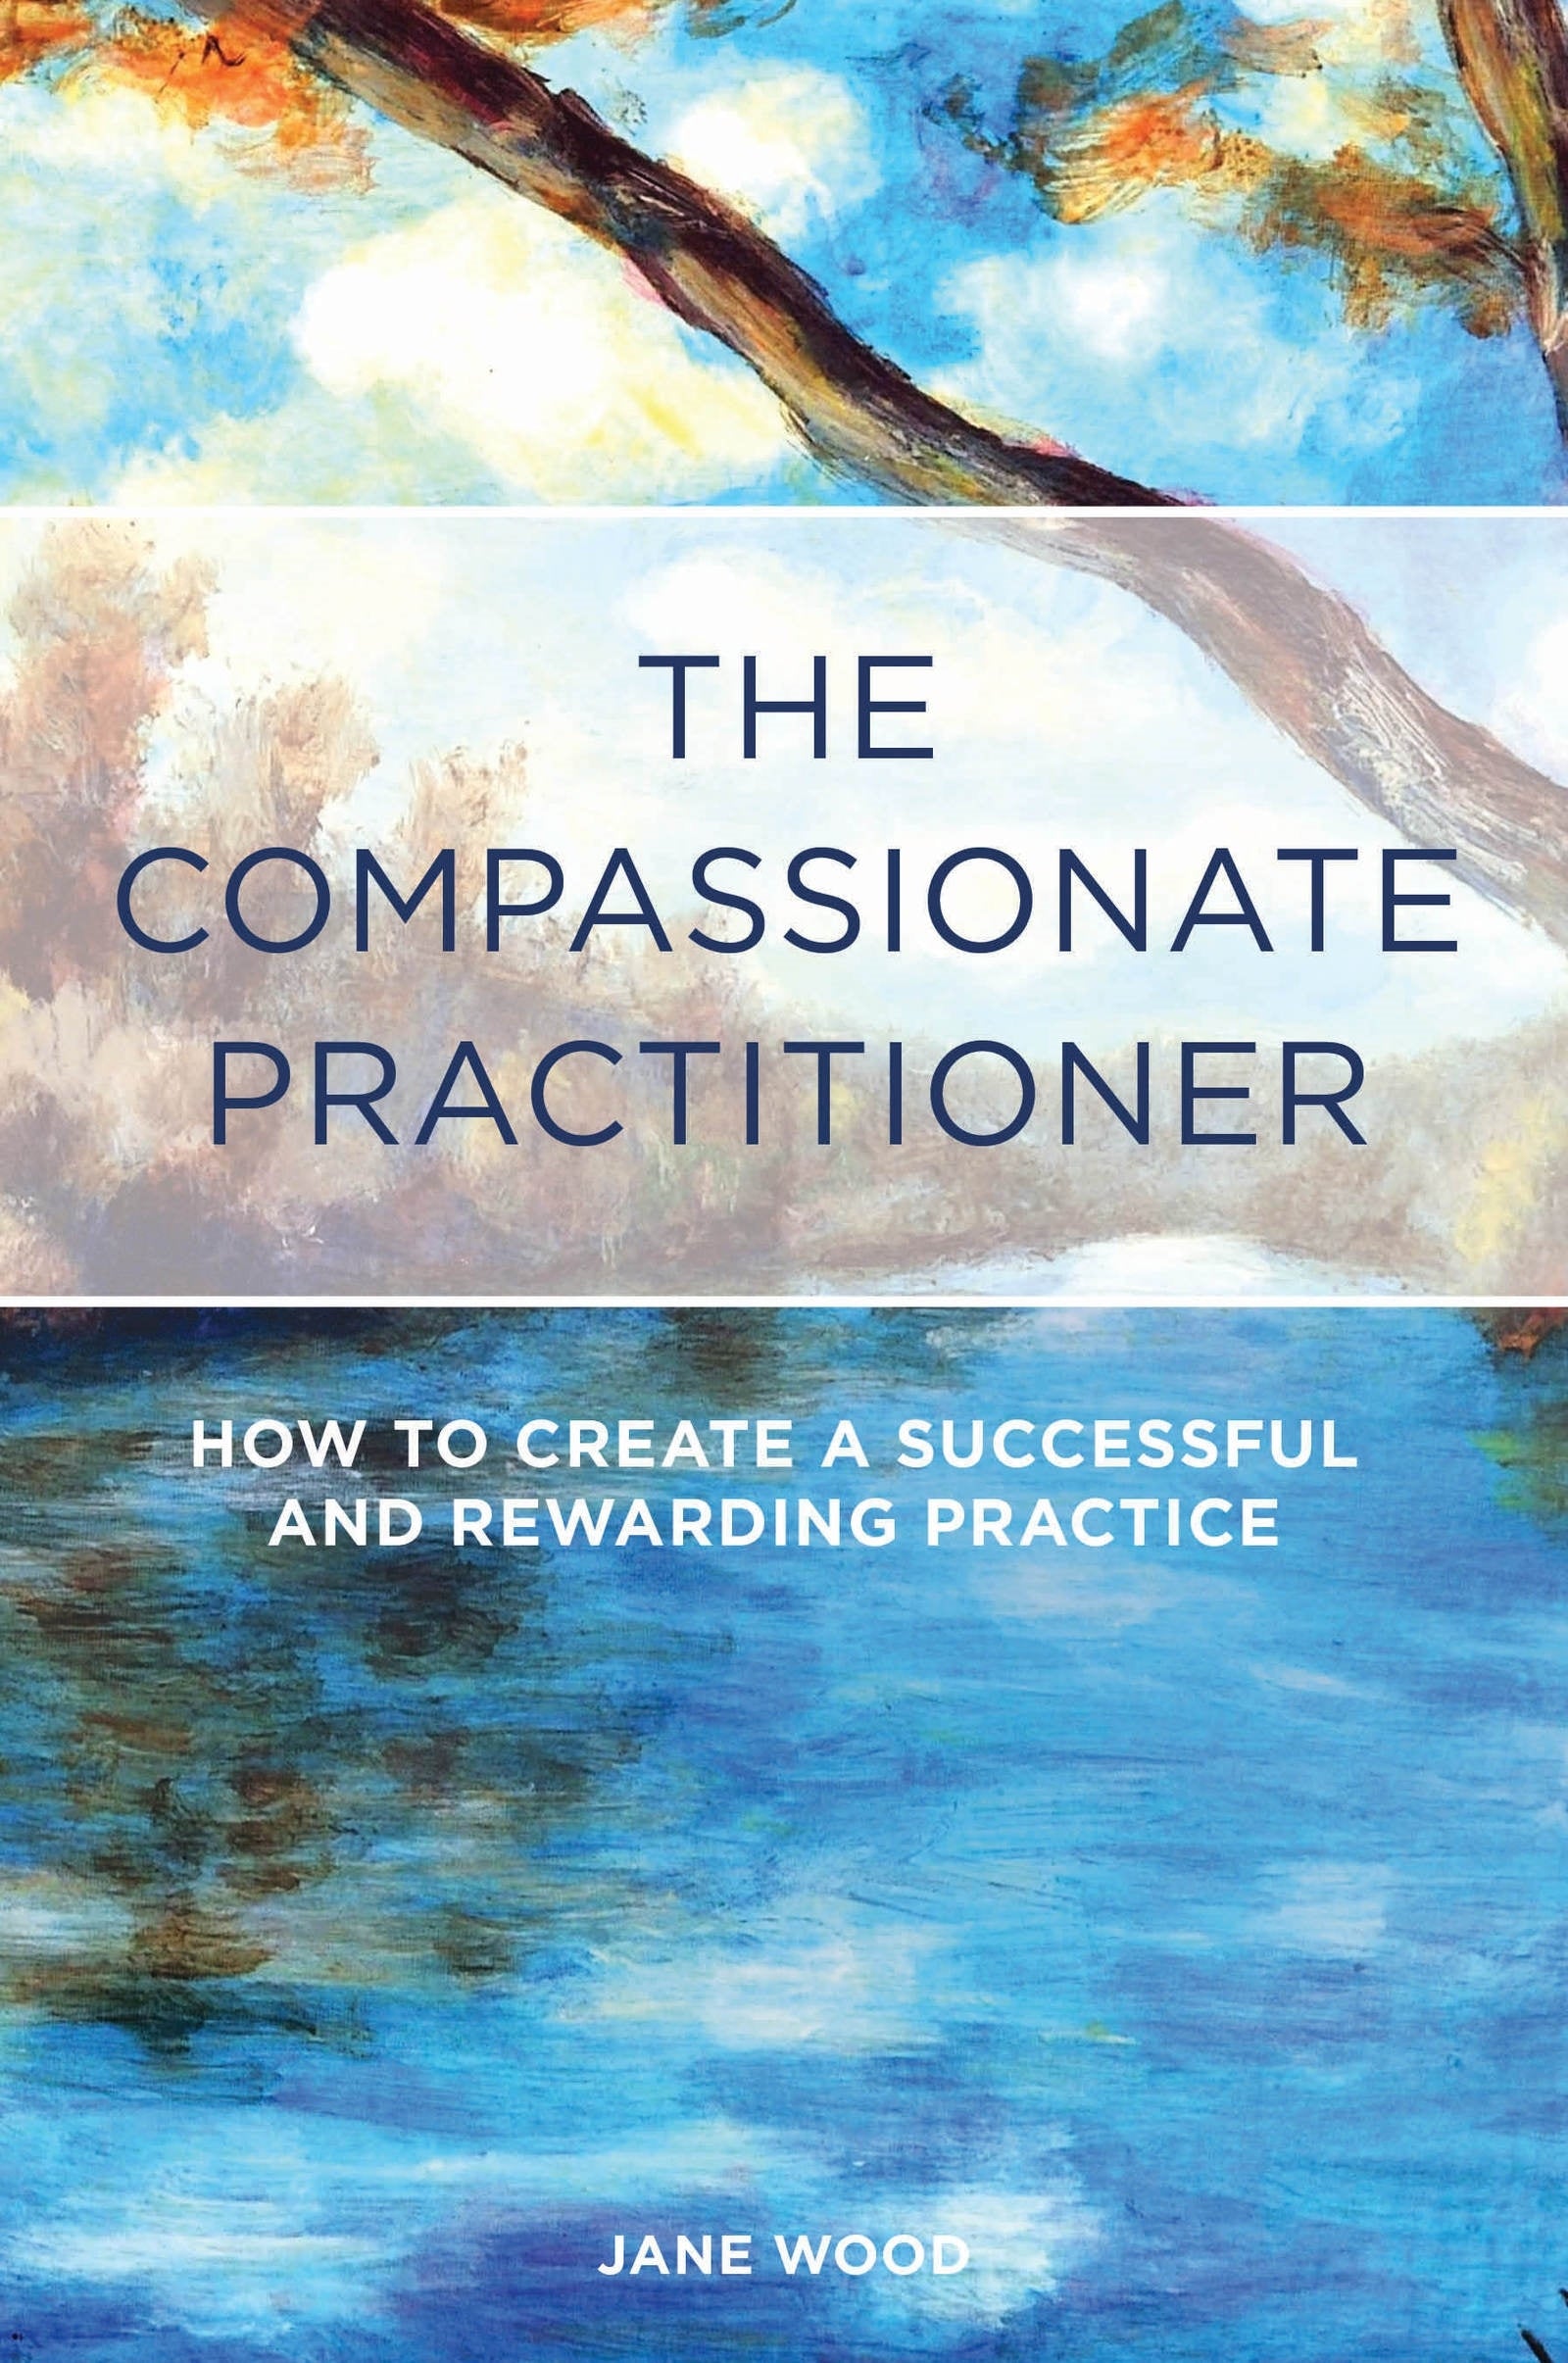 The Compassionate Practitioner by Jane Wood